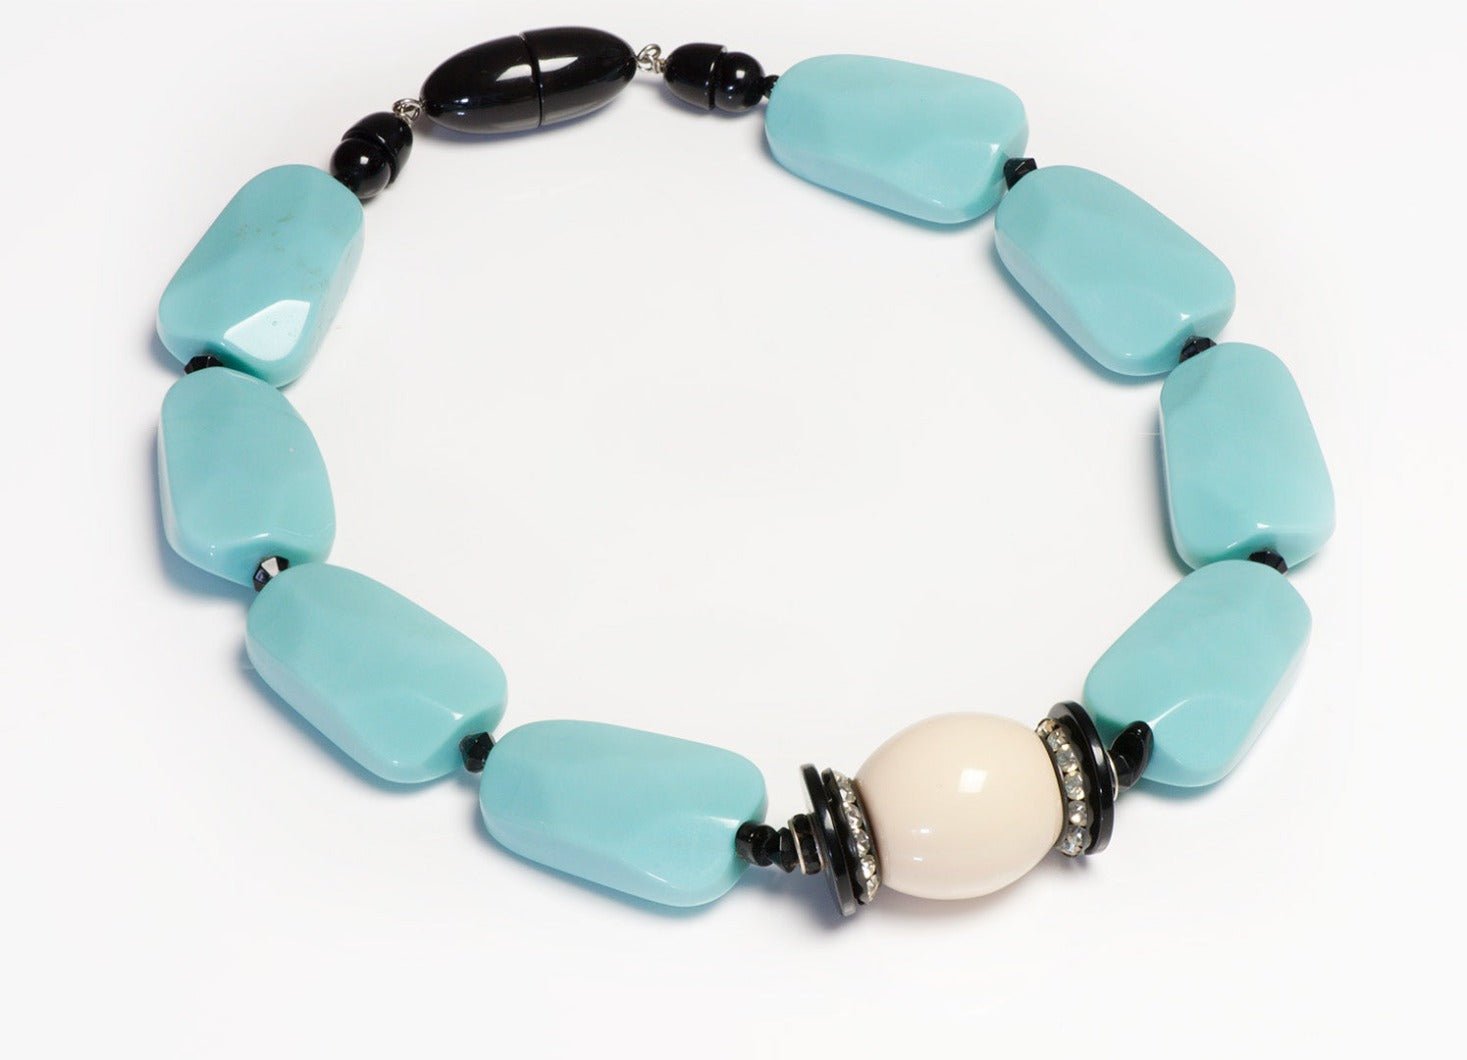 Angela Caputi Faux Turquoise Resin Beads Crystal Collar Necklace